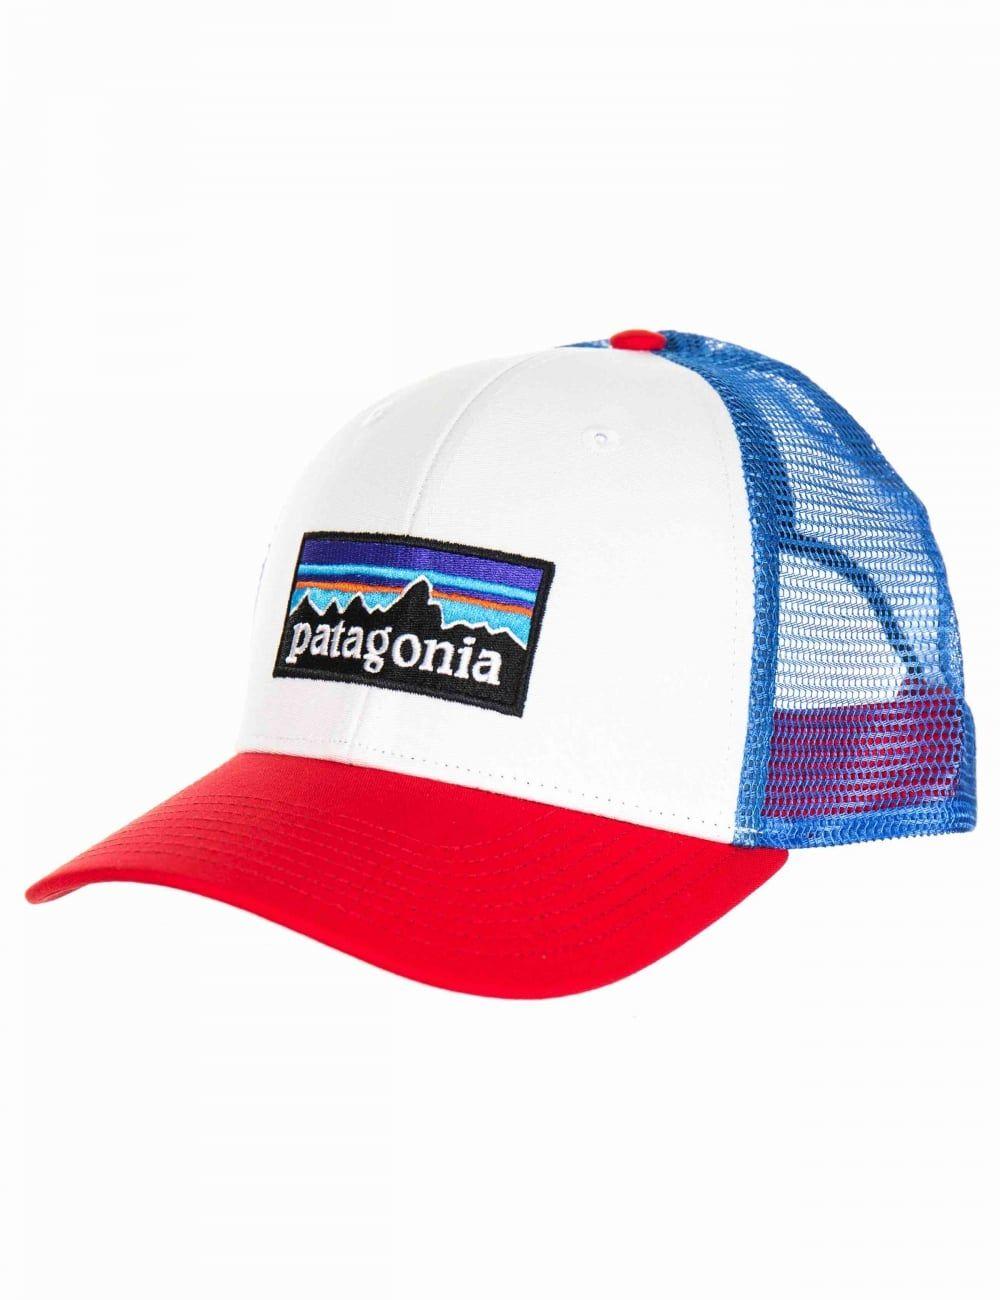 Red White and Blue Clothing Logo - Patagonia P 6 Logo Trucker Hat With Fire Red Andes Blue